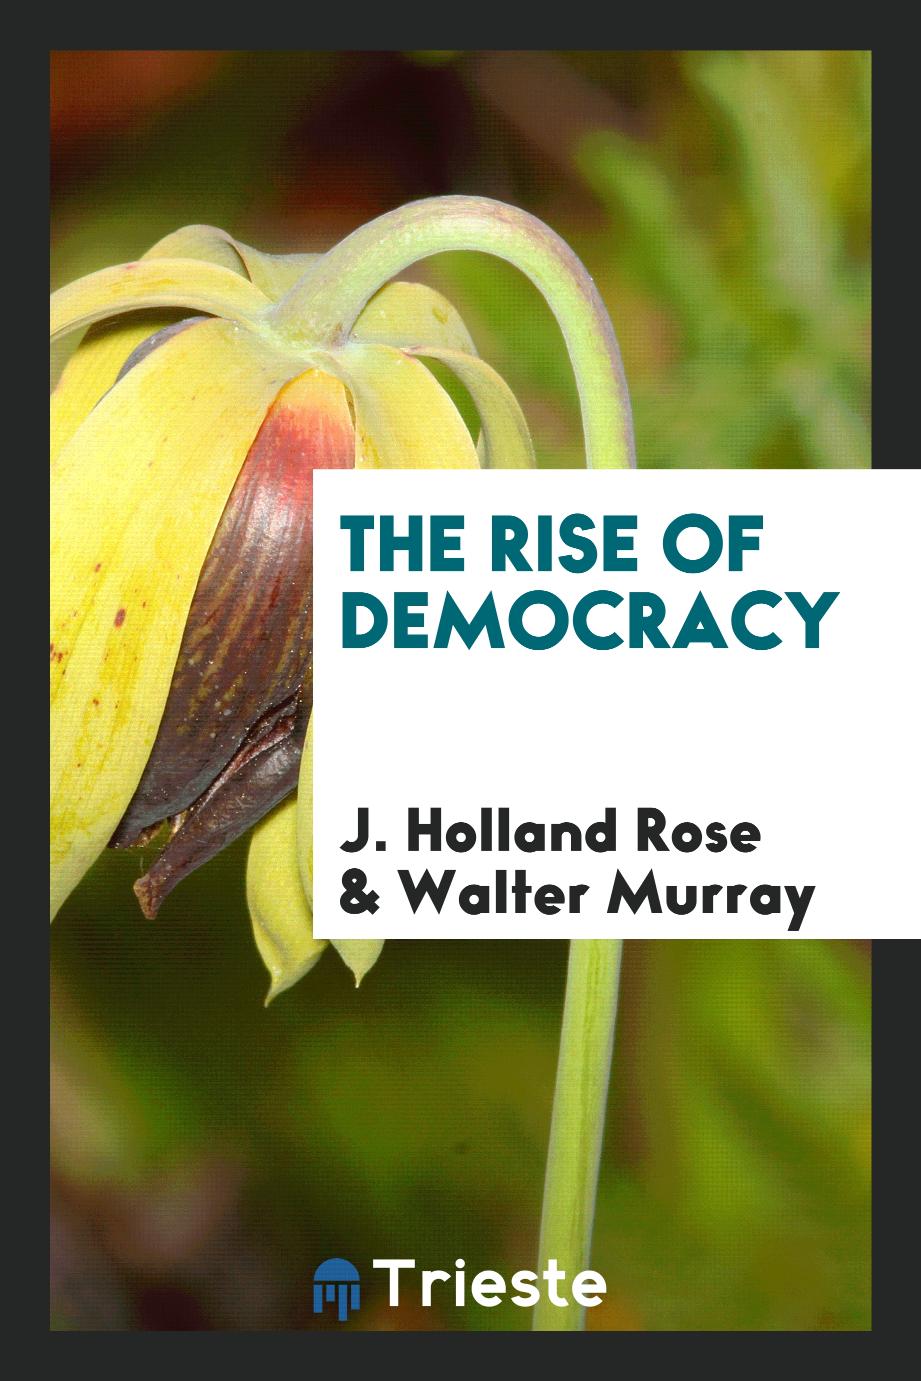 The rise of democracy